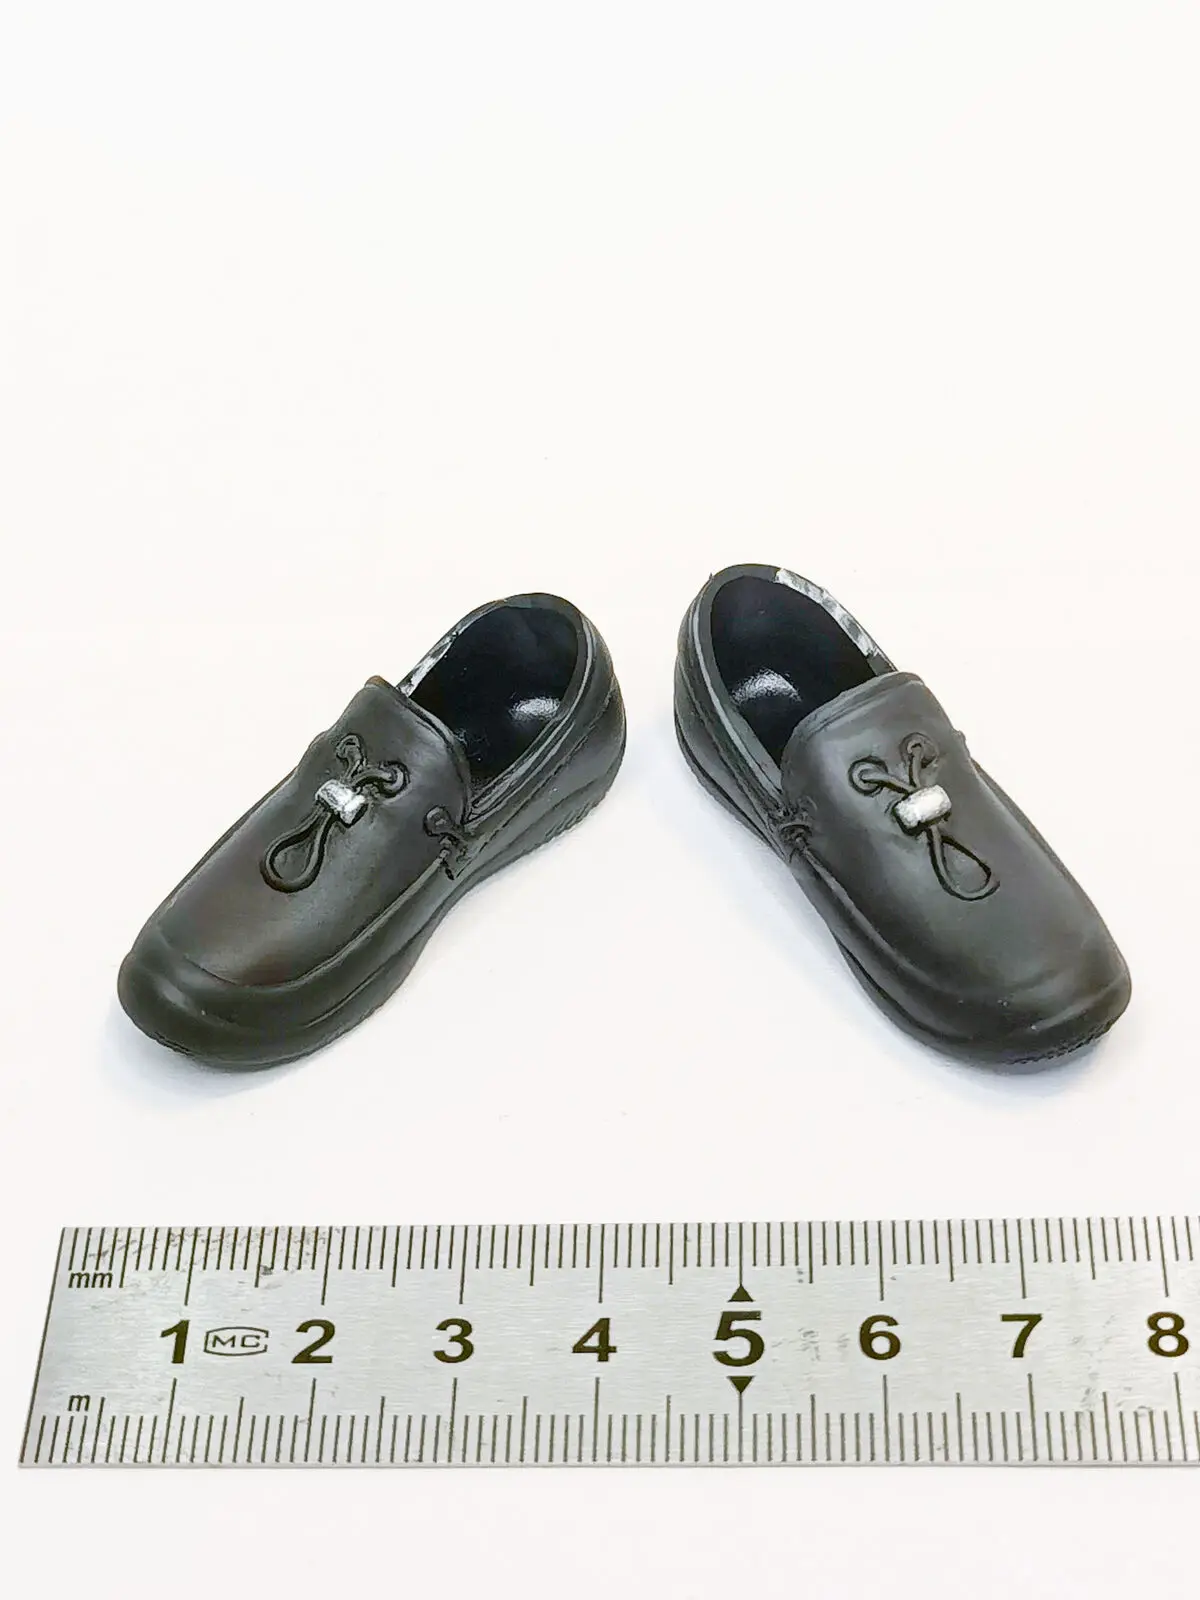 

1/6 Scale Male Soldier Black Leisure Shoes Leather Shoes Model for 12" Doll